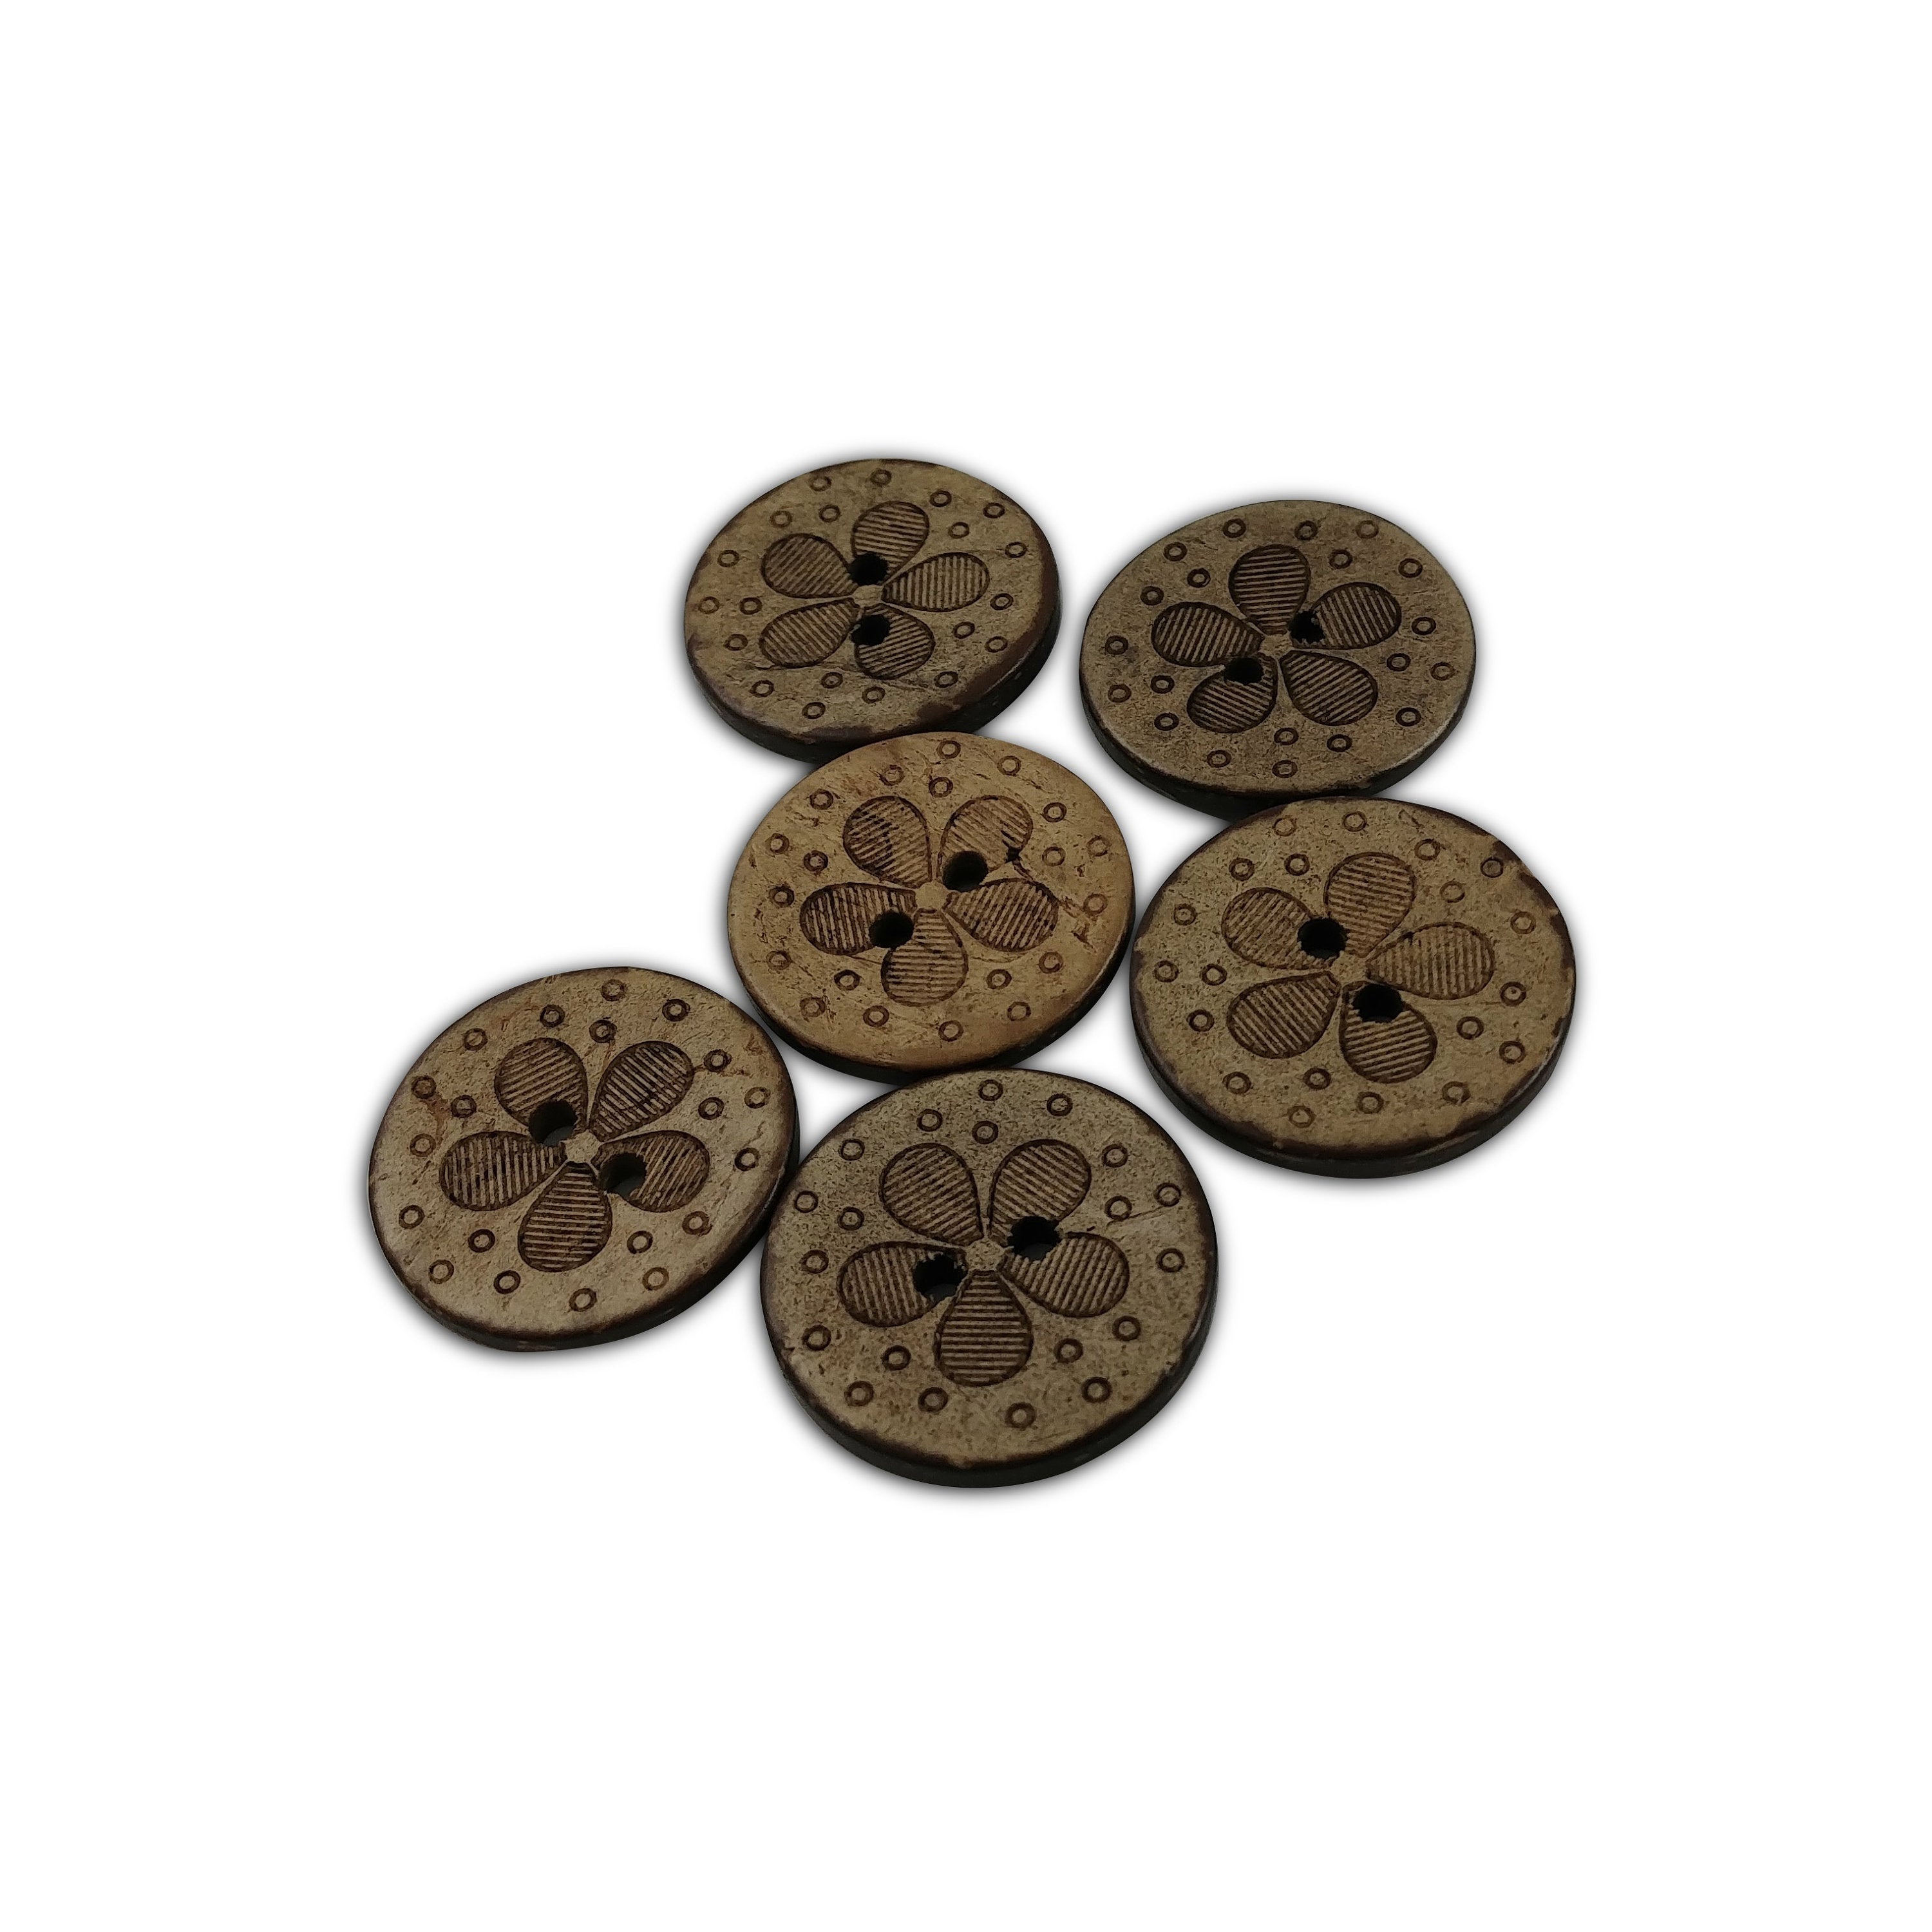 6 Two holes flower pattern coconut shell buttons 20mm 